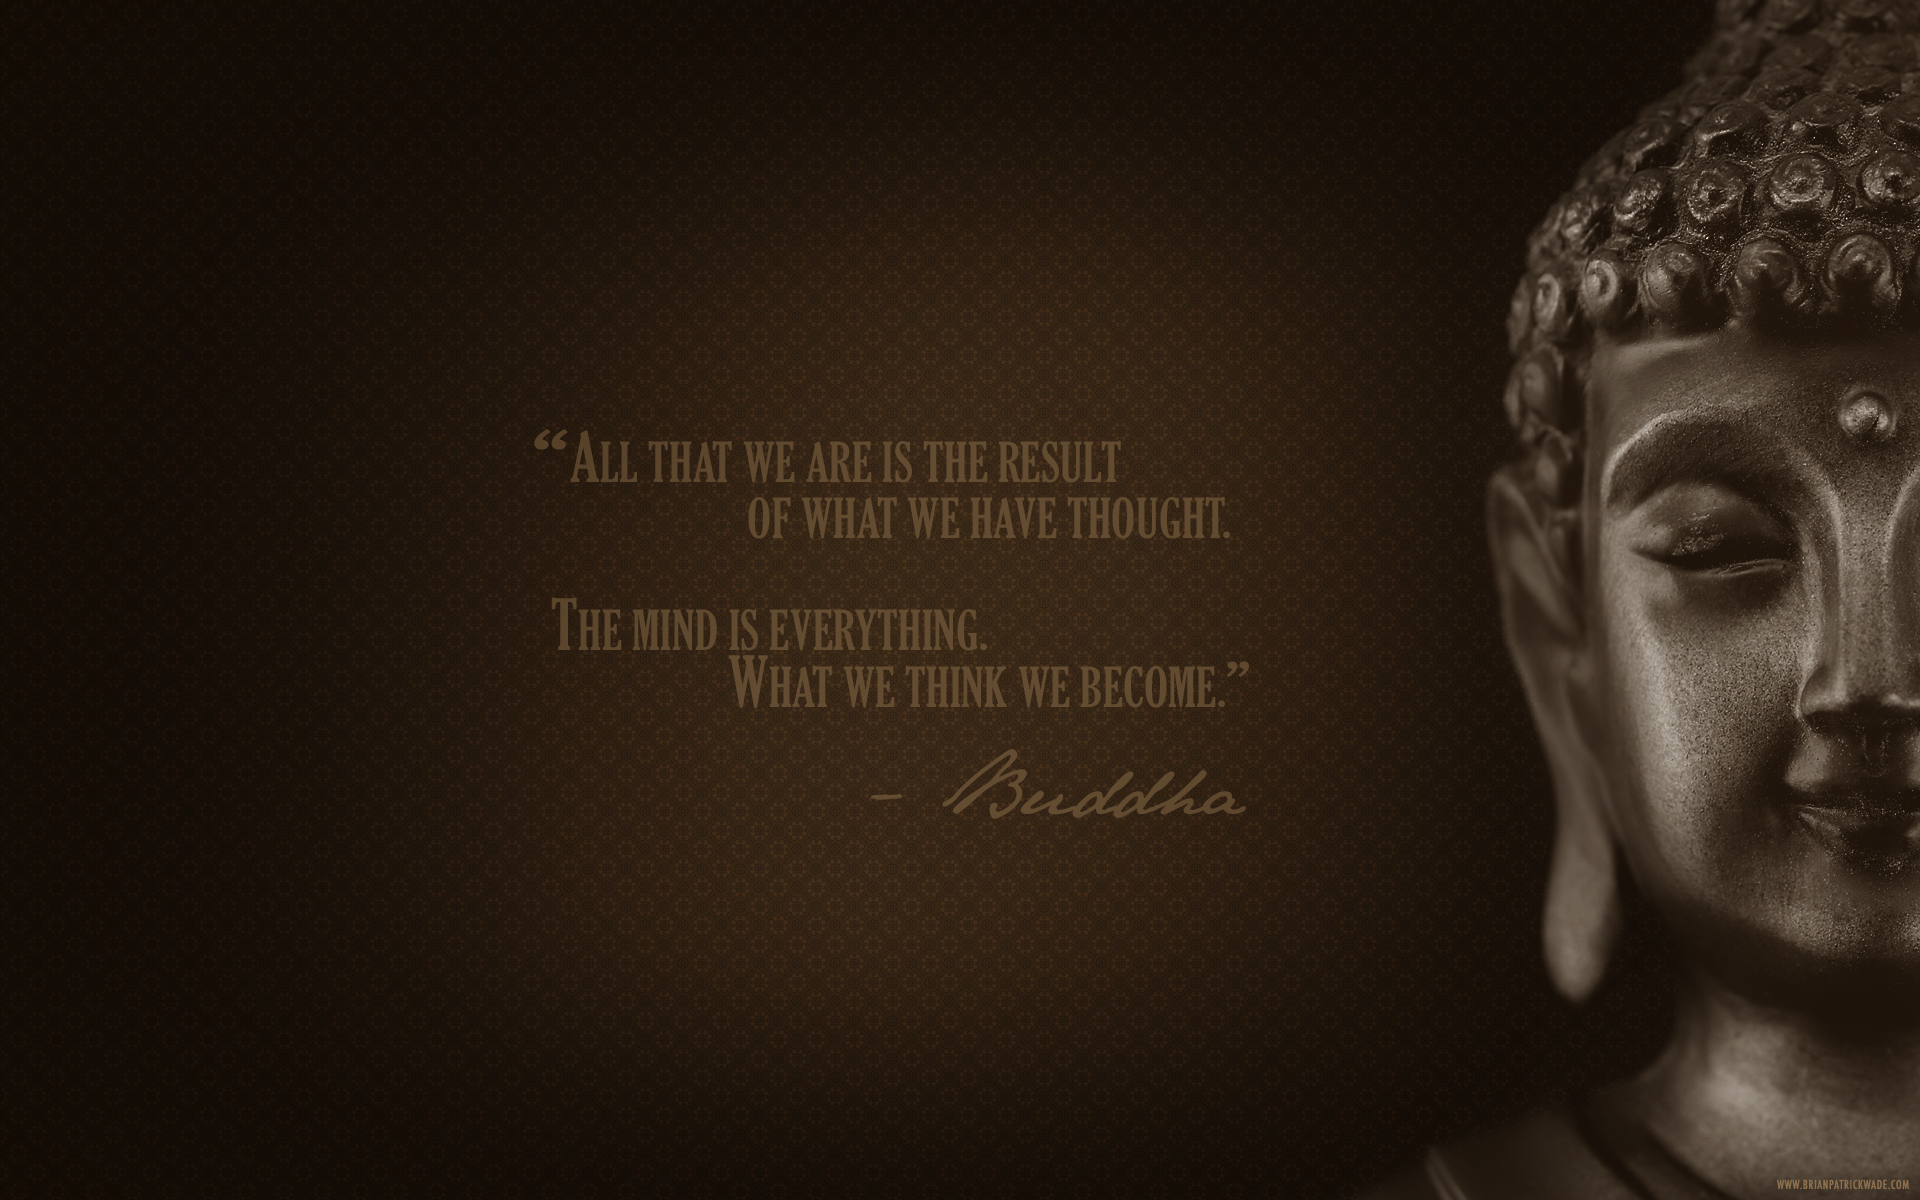 Motivational Wallpaper On Thoughts By Buddha Dont Give Up